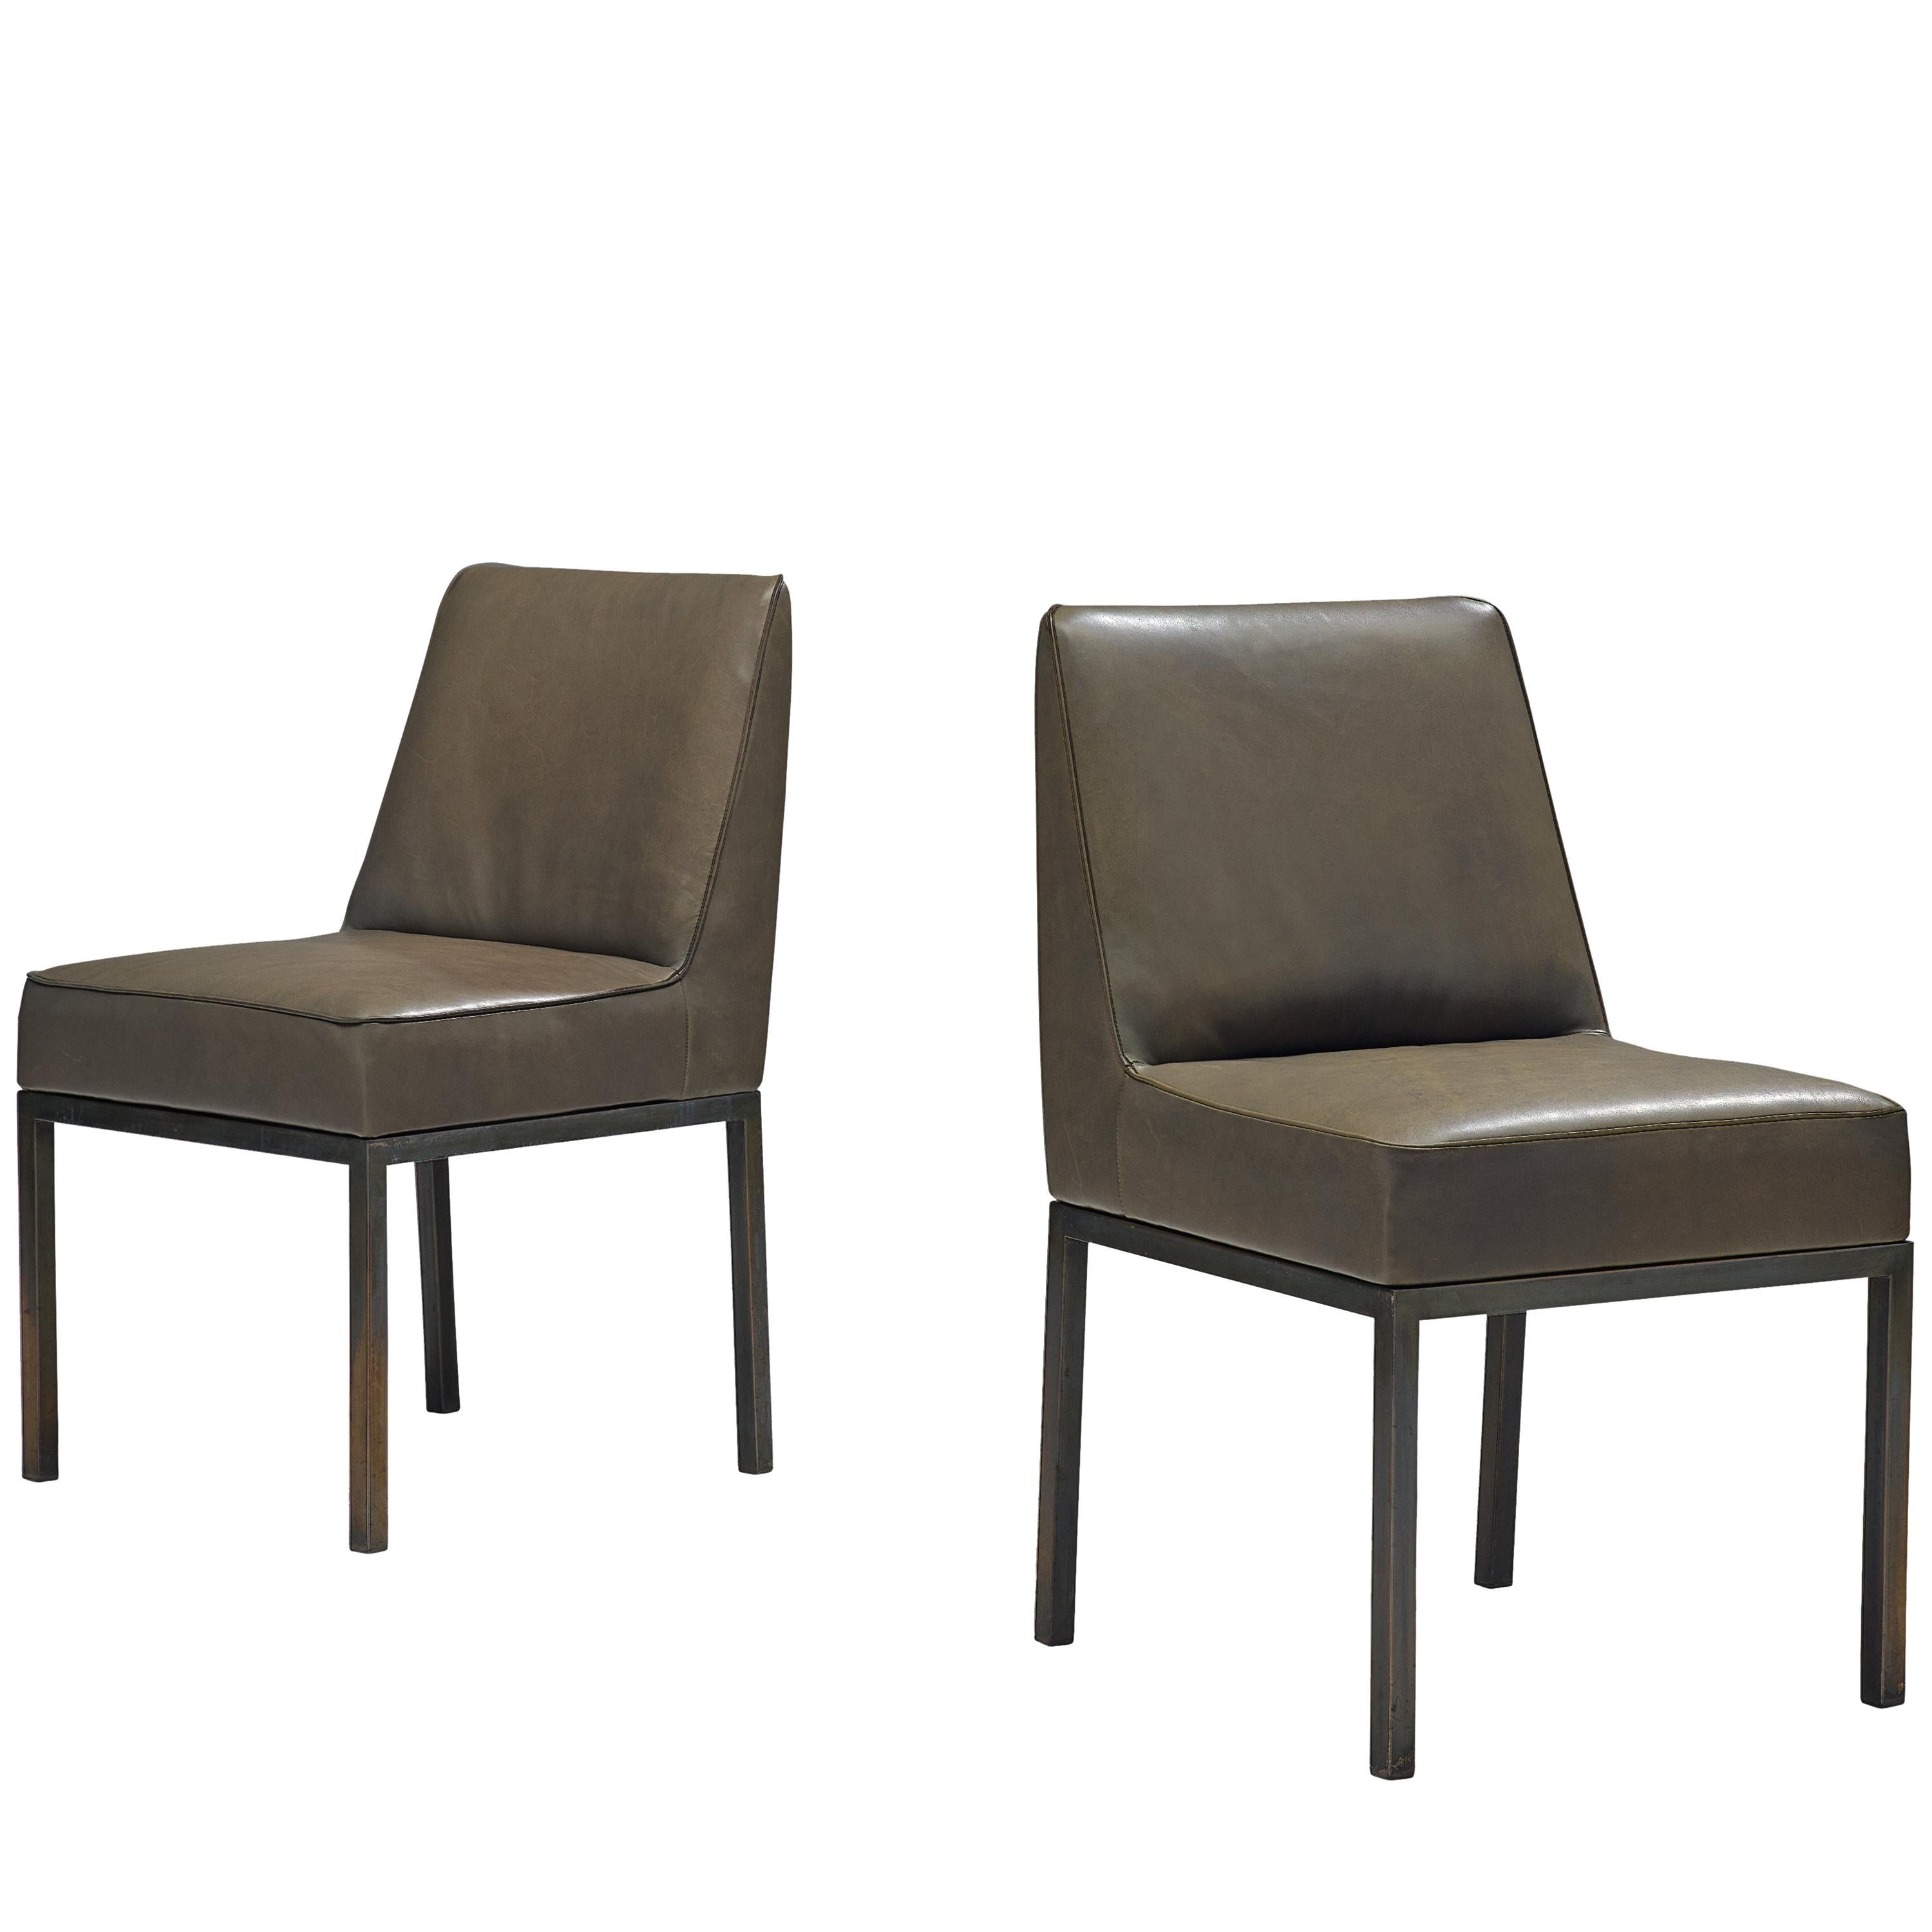 Jules Wabbes Pair of Reupholstered ‘Louise’ Dining Chairs in Olive Green Leather